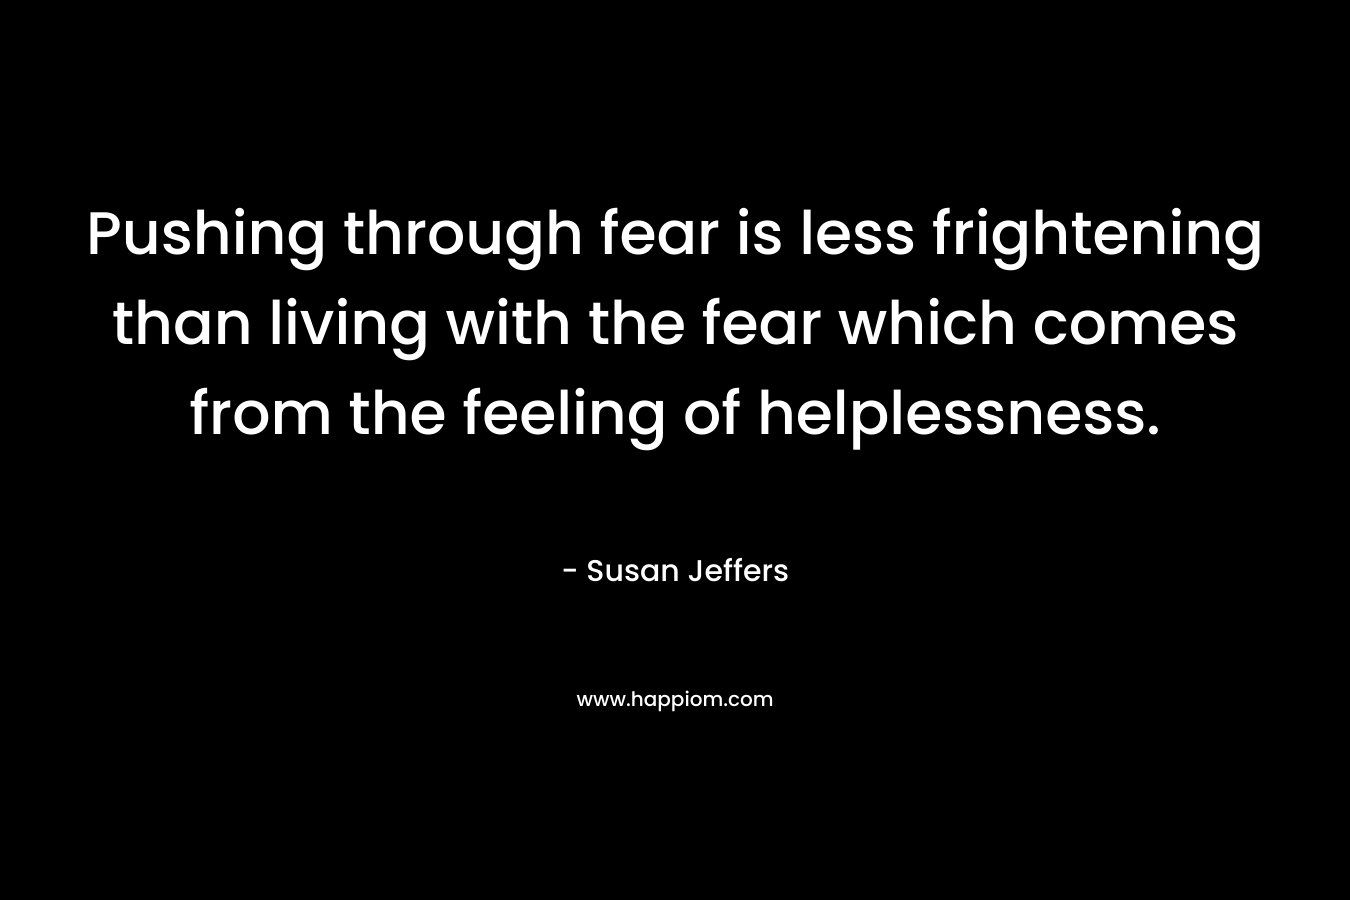 Pushing through fear is less frightening than living with the fear which comes from the feeling of helplessness. – Susan Jeffers